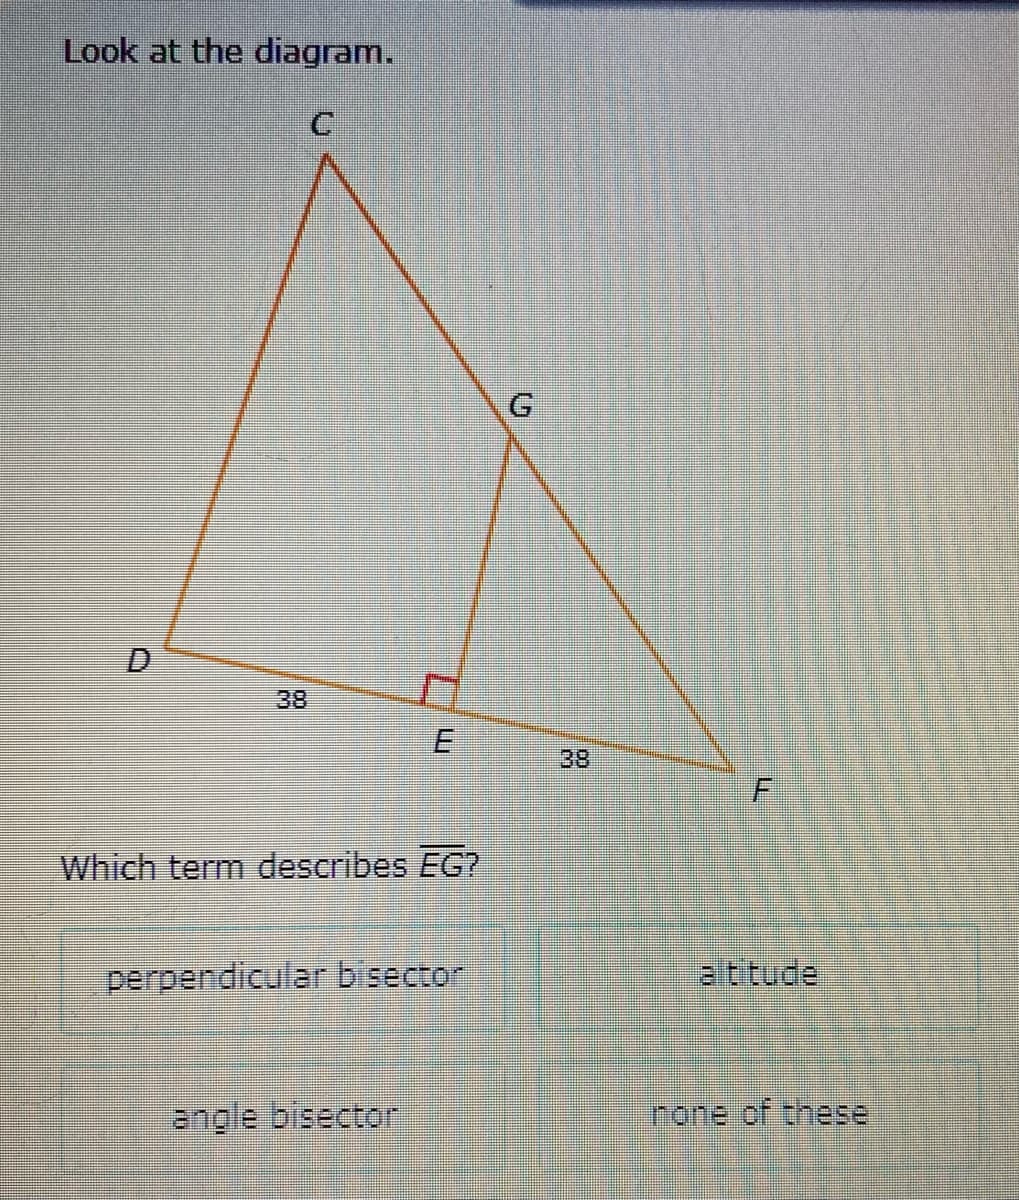 Look at the diagram.
D.
38
38
Which term describes EG?
perpendicular bisector
altitude
angle bisector
none of these
